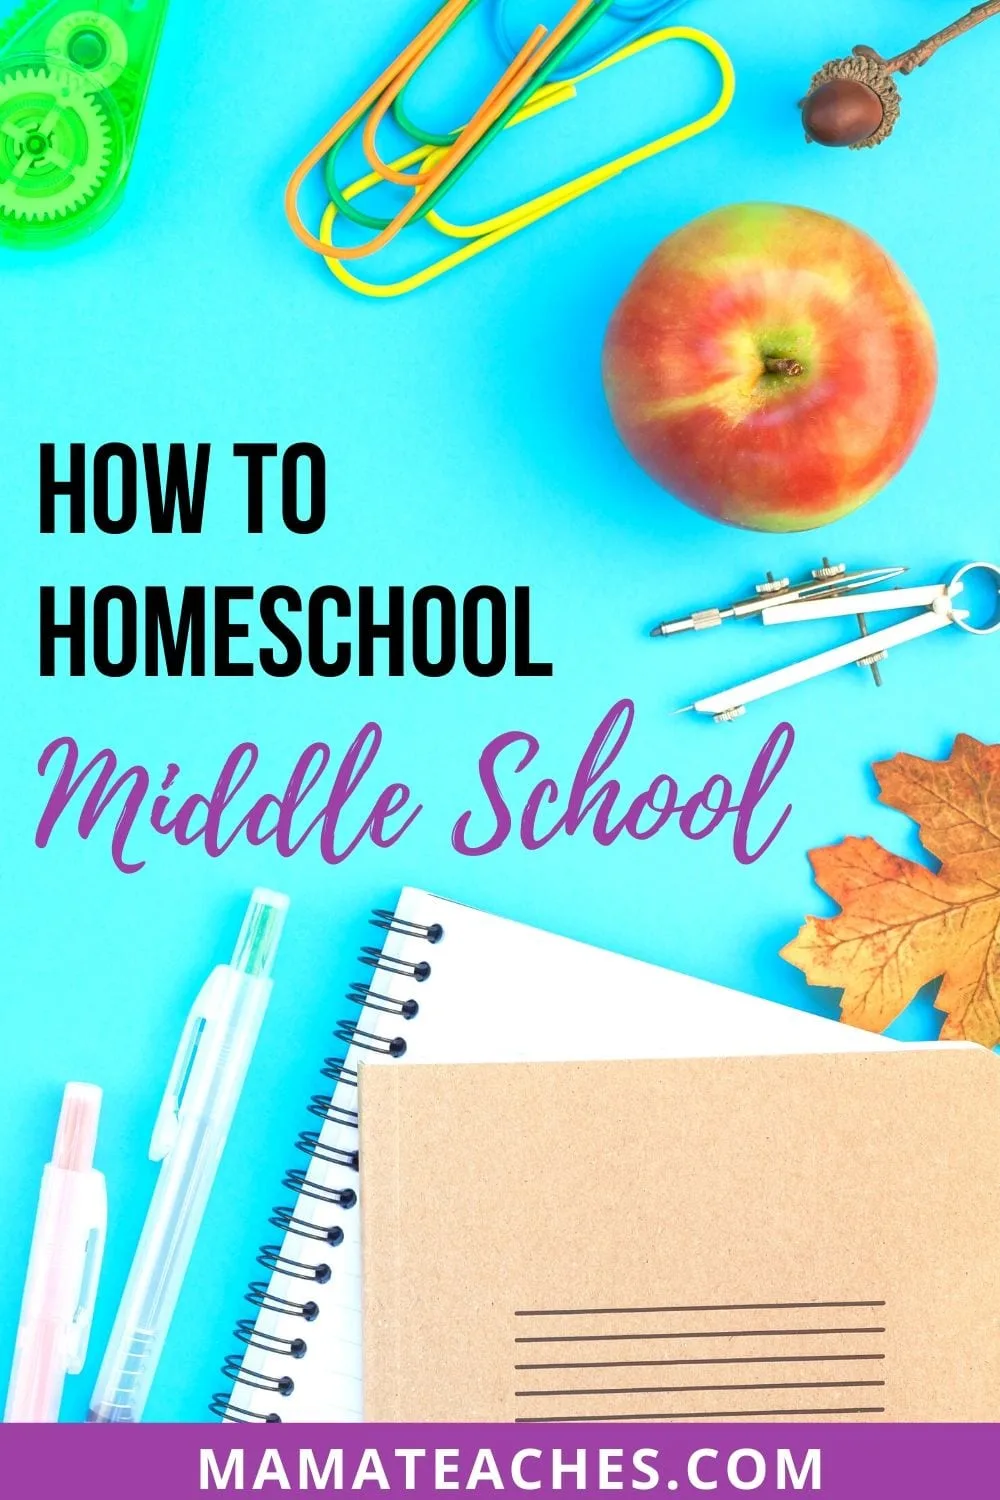 Learn How to Homeschool Middle School - MamaTeaches.com